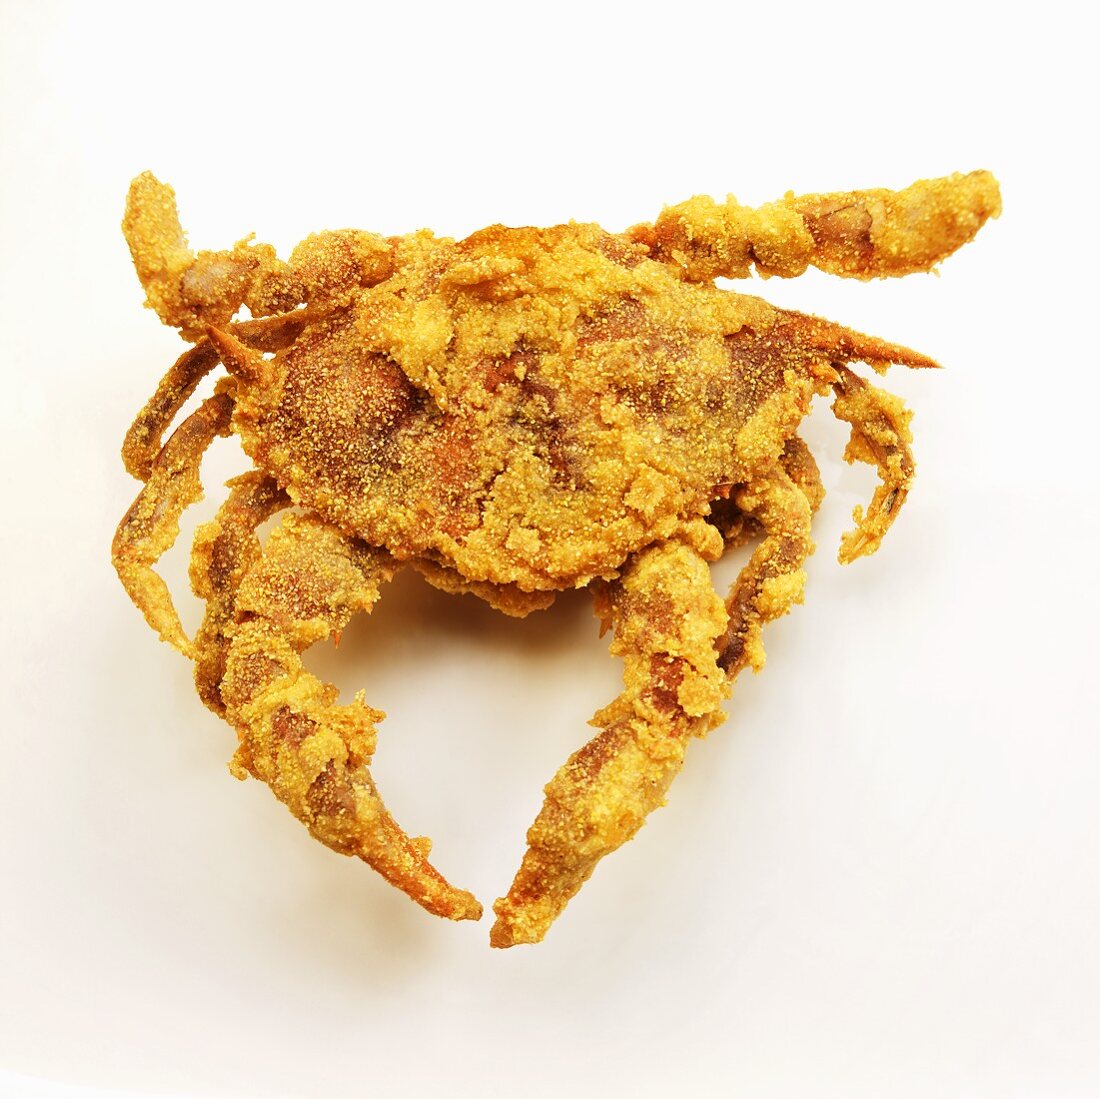 Soft Shell Crab Fried with Cornmeal Breading; White Background